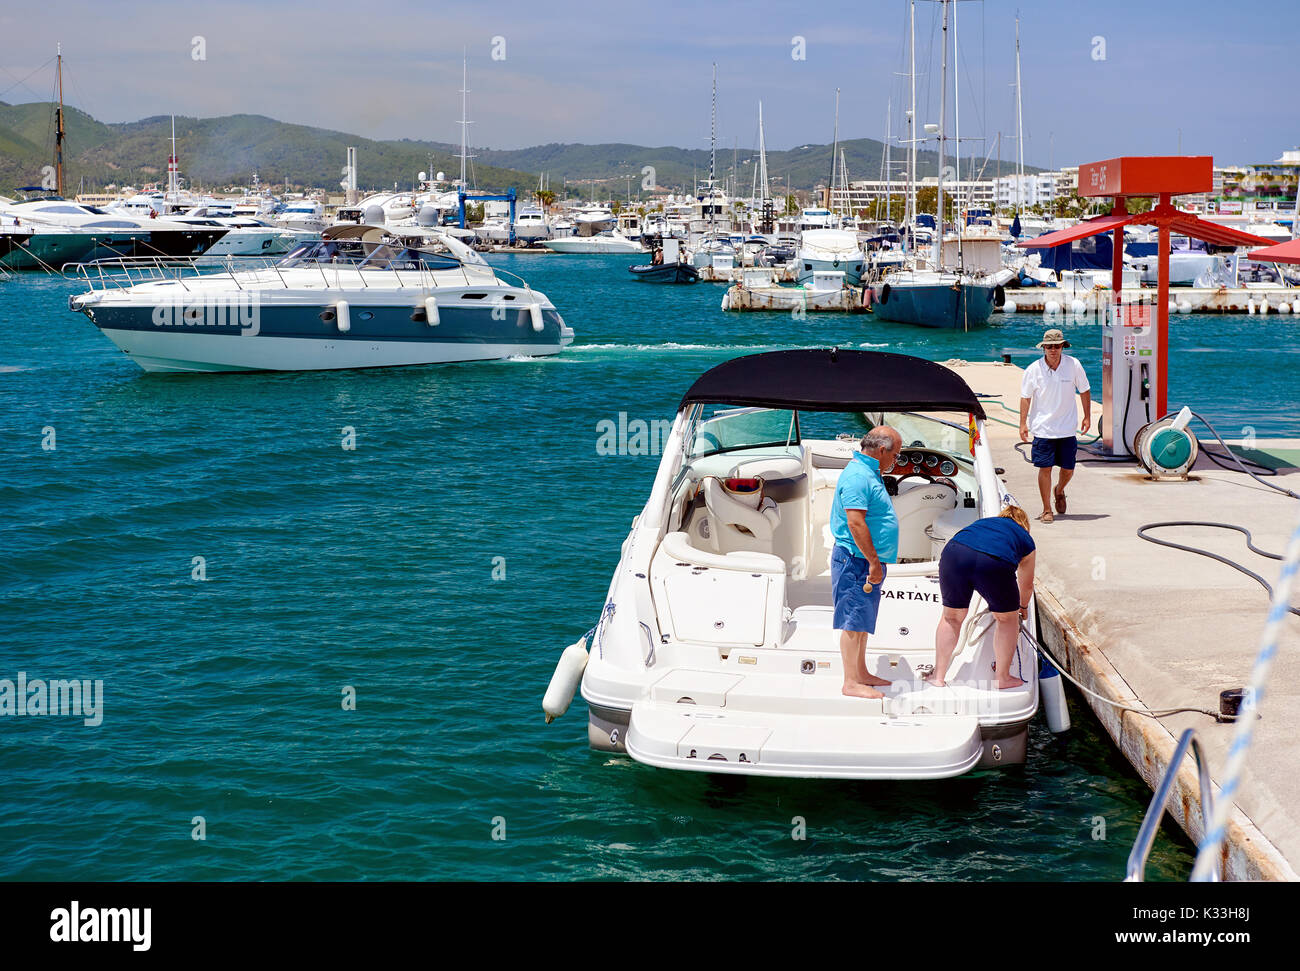 Ibiza, Spain - June 10, 2017: Cepsa Floating fuel station in Ibiza. Spanish multinational oil and gas company, Cepsa was founded in 1929. Balearic Isl Stock Photo